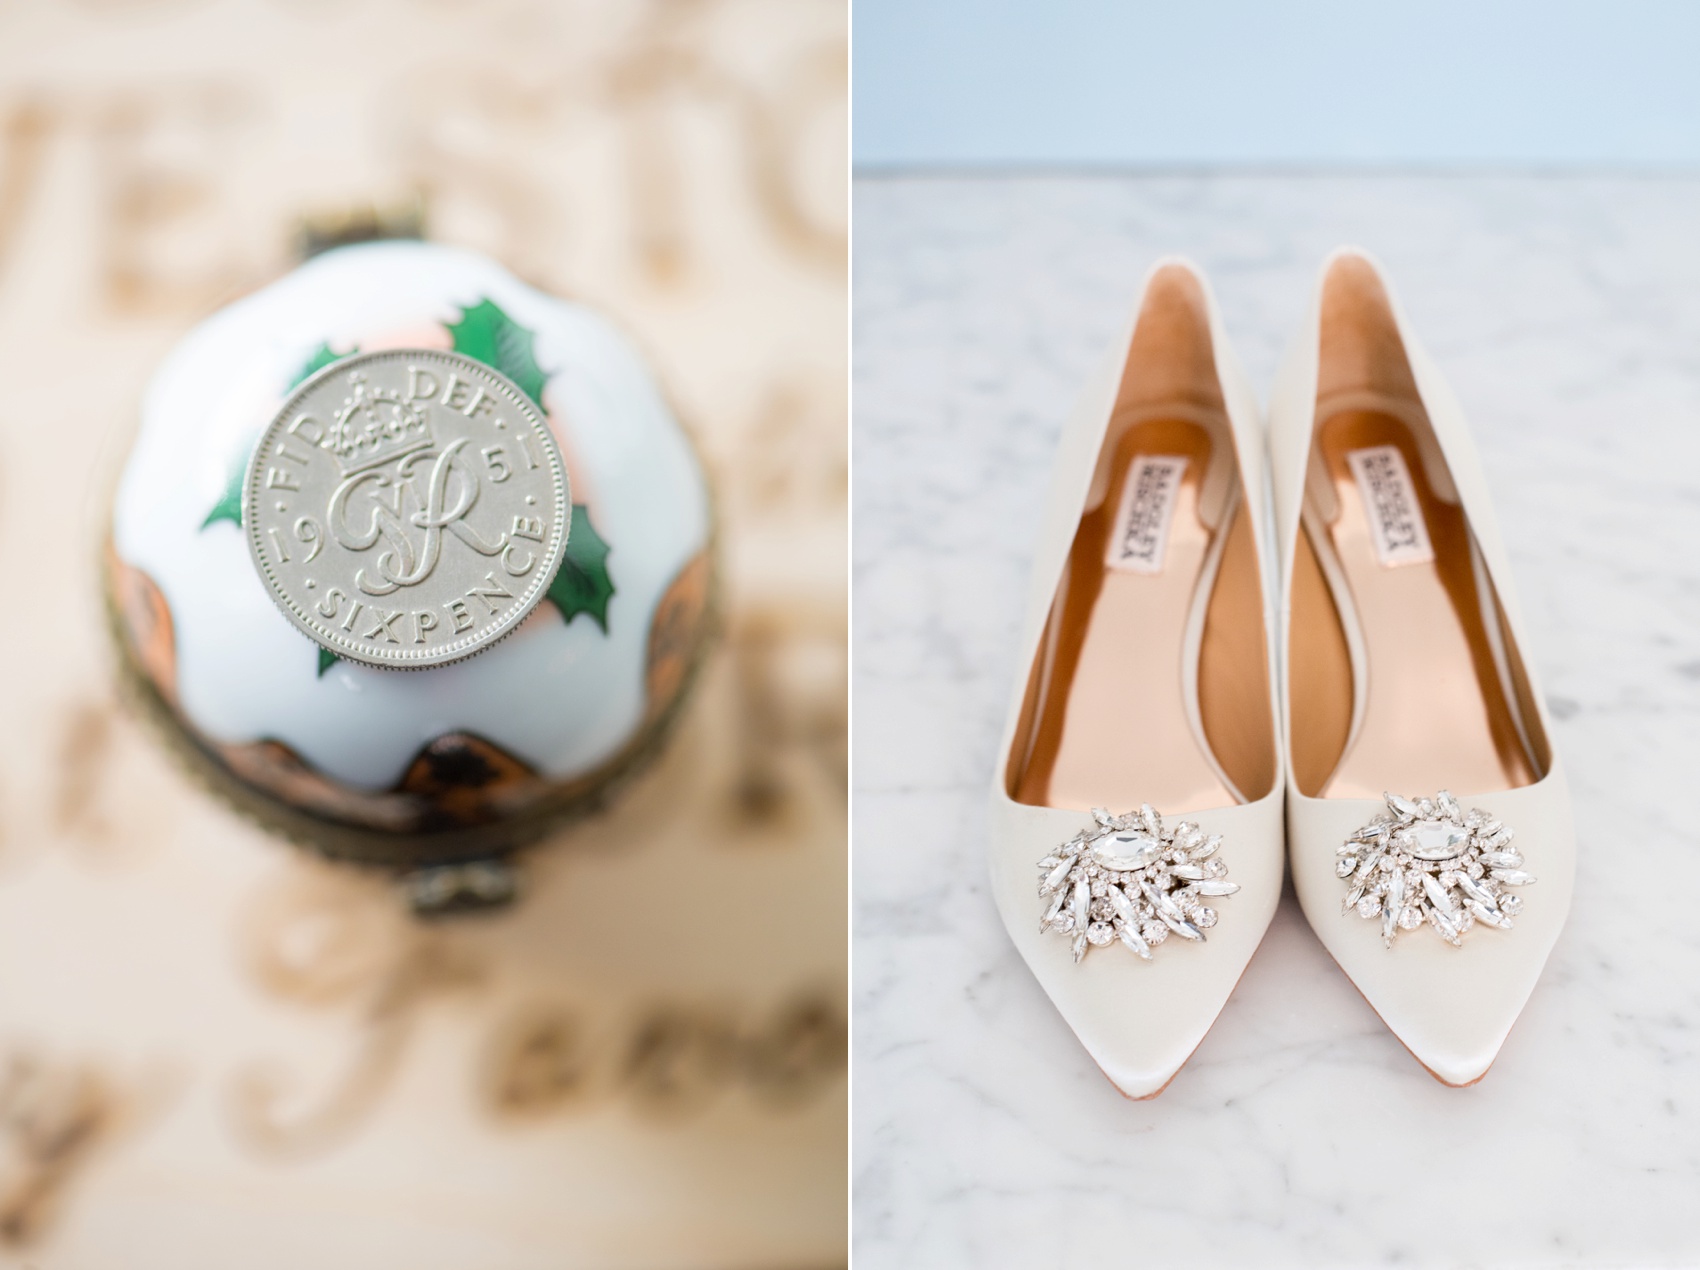 Omni Bedford Springs Resort wedding photos by Mikkel Paige Photography. White and rhinestone Badgley Mischka wedding heels and a sixpence for the bride's shoe.